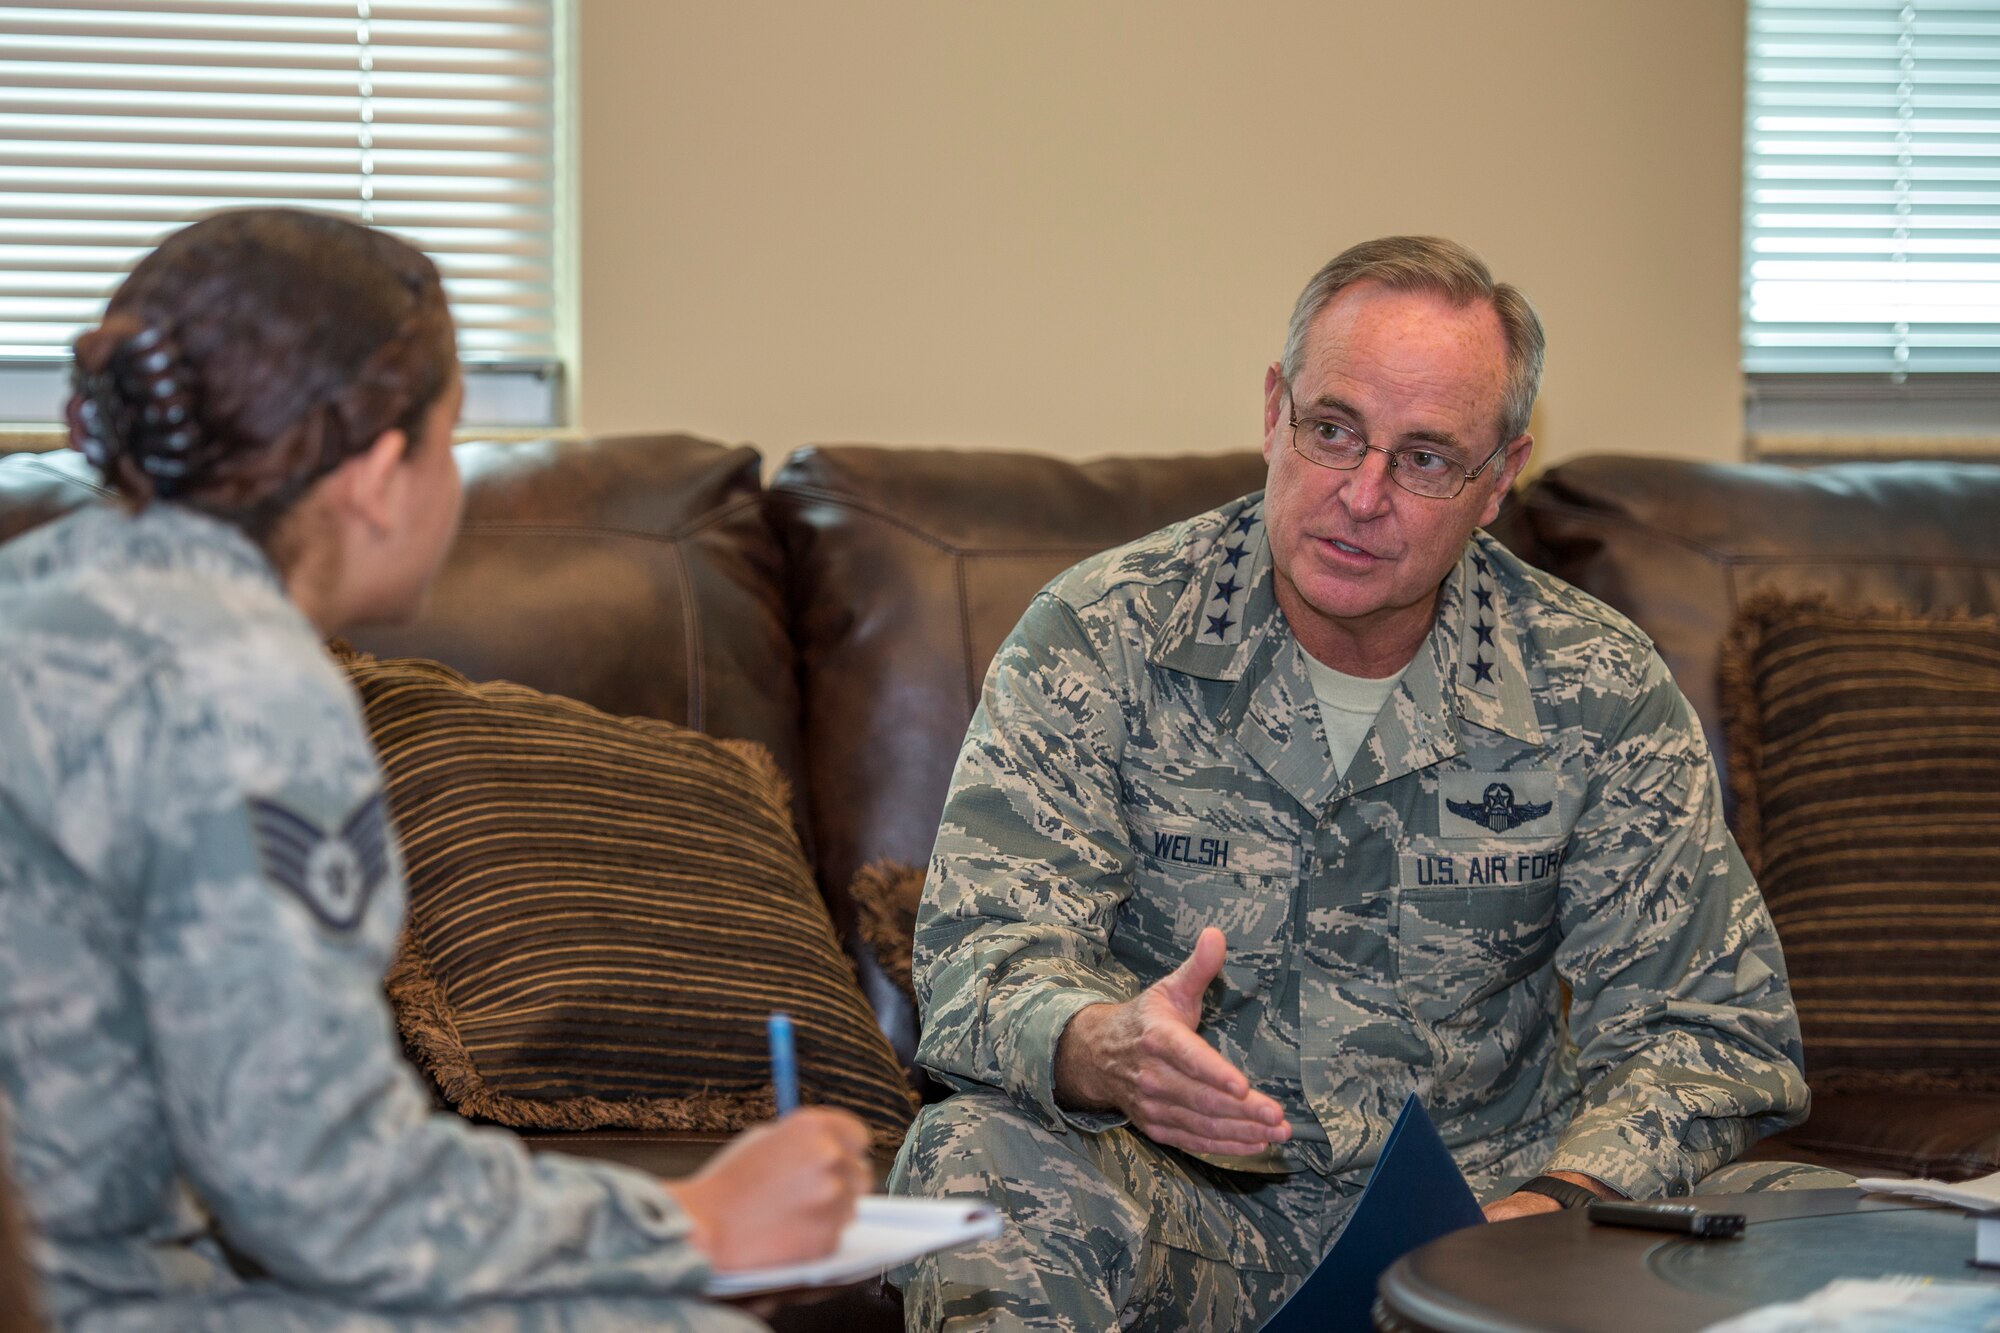 Air Force Chief of Staff Gen. Mark A. Welsh III is interviewed by Staff Sgt. Malia Jenkins, 5th Bomb Wing Public Affairs NCO in charge, Command Information, at Minot Air Force Base, N.D., Aug. 5, 2015.  Welsh is the 20th Chief of Staff of the U.S. Air Force and serves as the senior uniformed Air Force officer responsible for the organization, training and equipping of 664,000 active-duty, guard, reserve and civilian forces serving in the United States and overseas. (U.S. Air Force photo/Airman 1st Class Justin T. Armstrong)